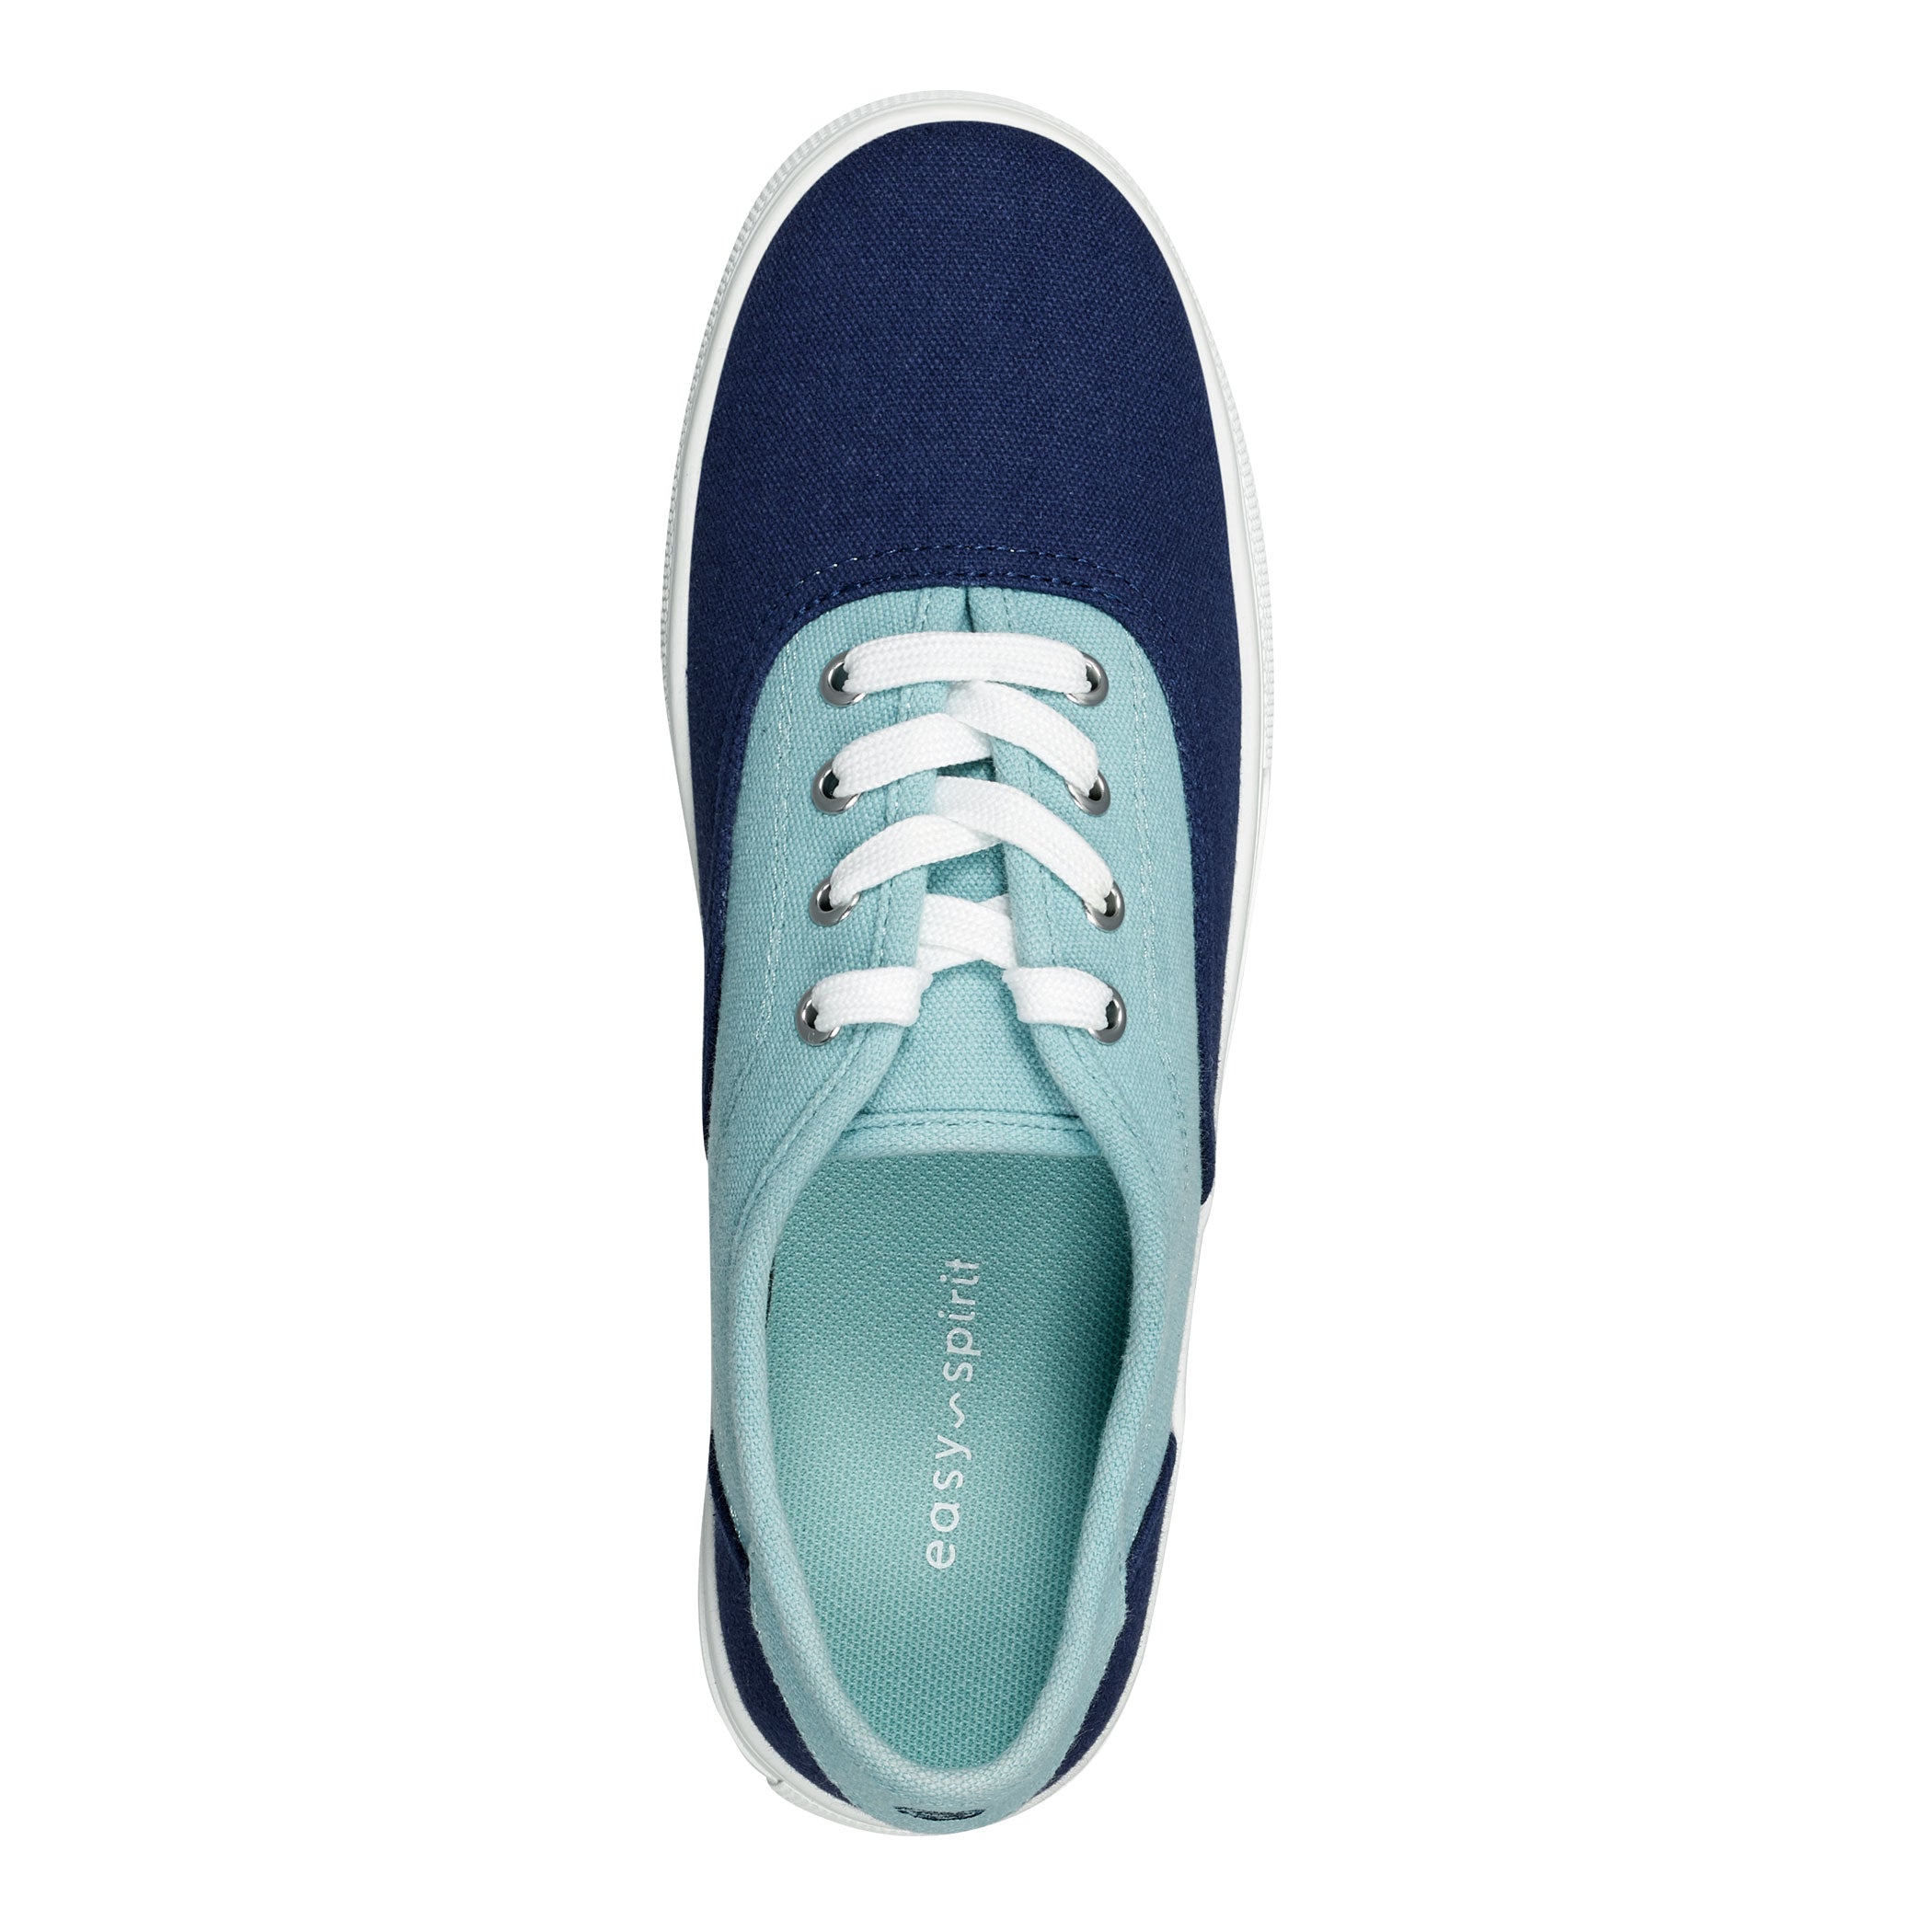 Kaelly Eco Lace Up Sneakers